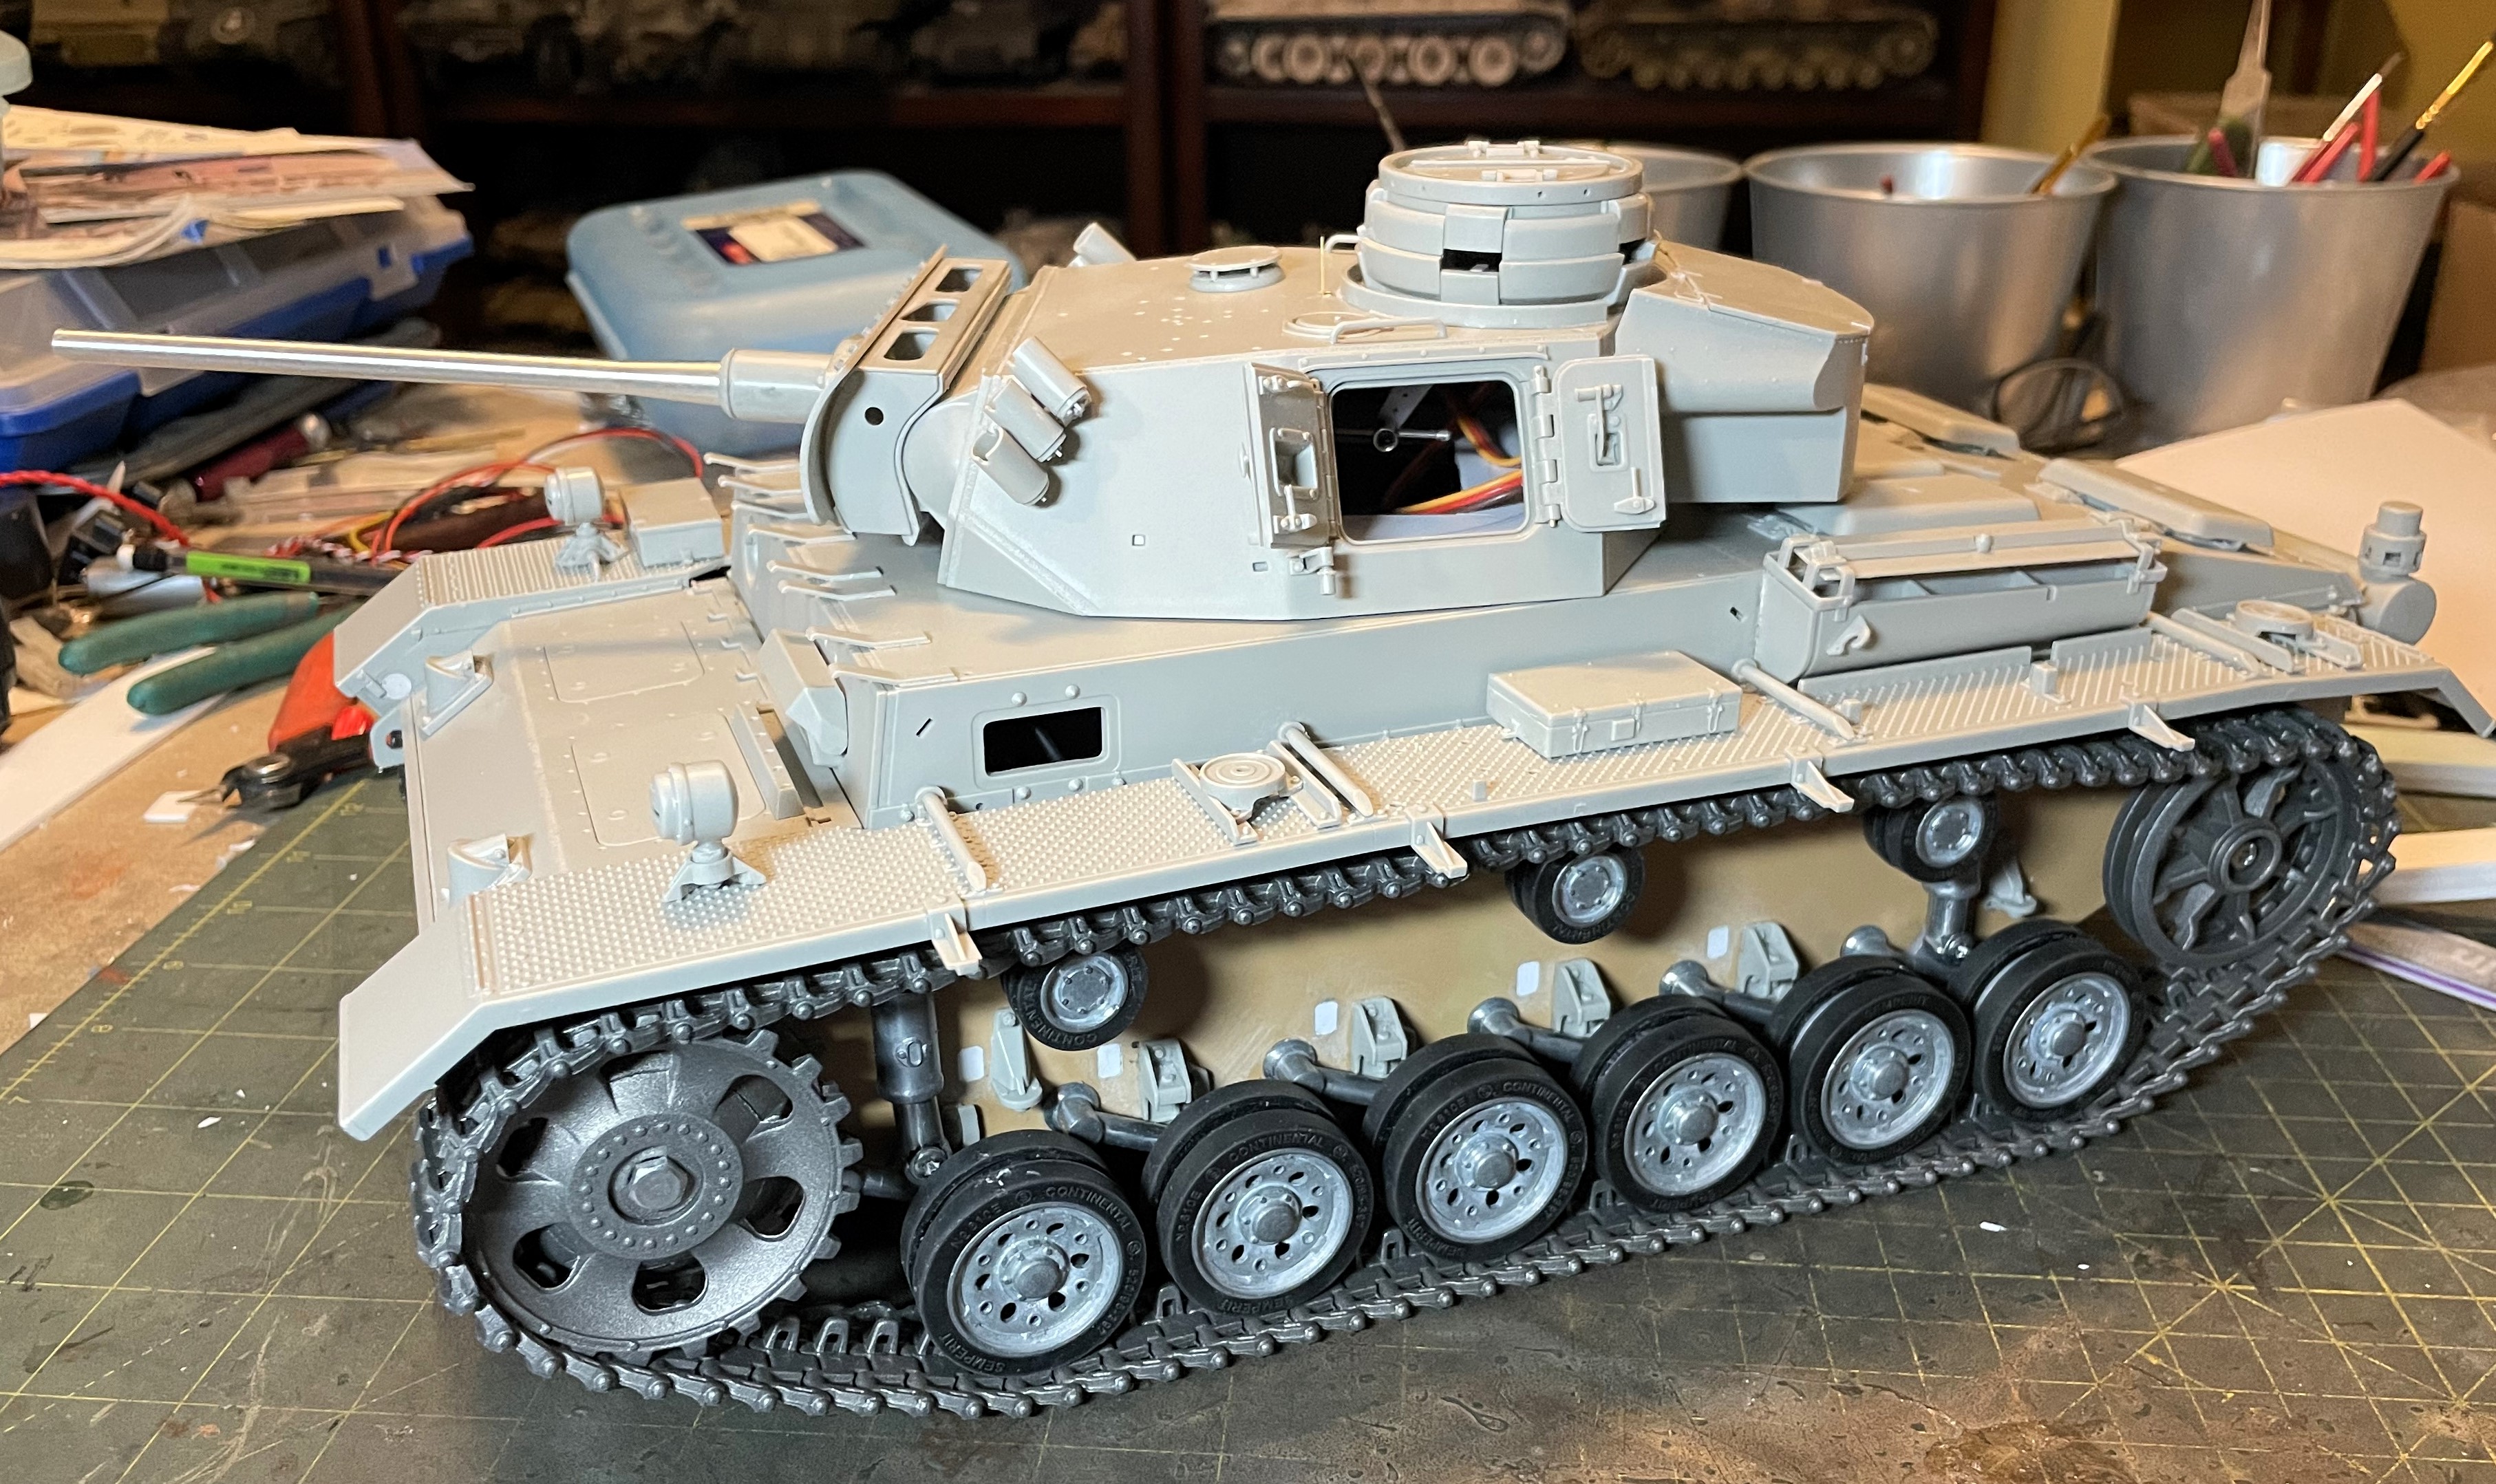 1/16 PzKpfw III Ausf M - Trumpeter/Heller kit with Taigen hull integration - Build